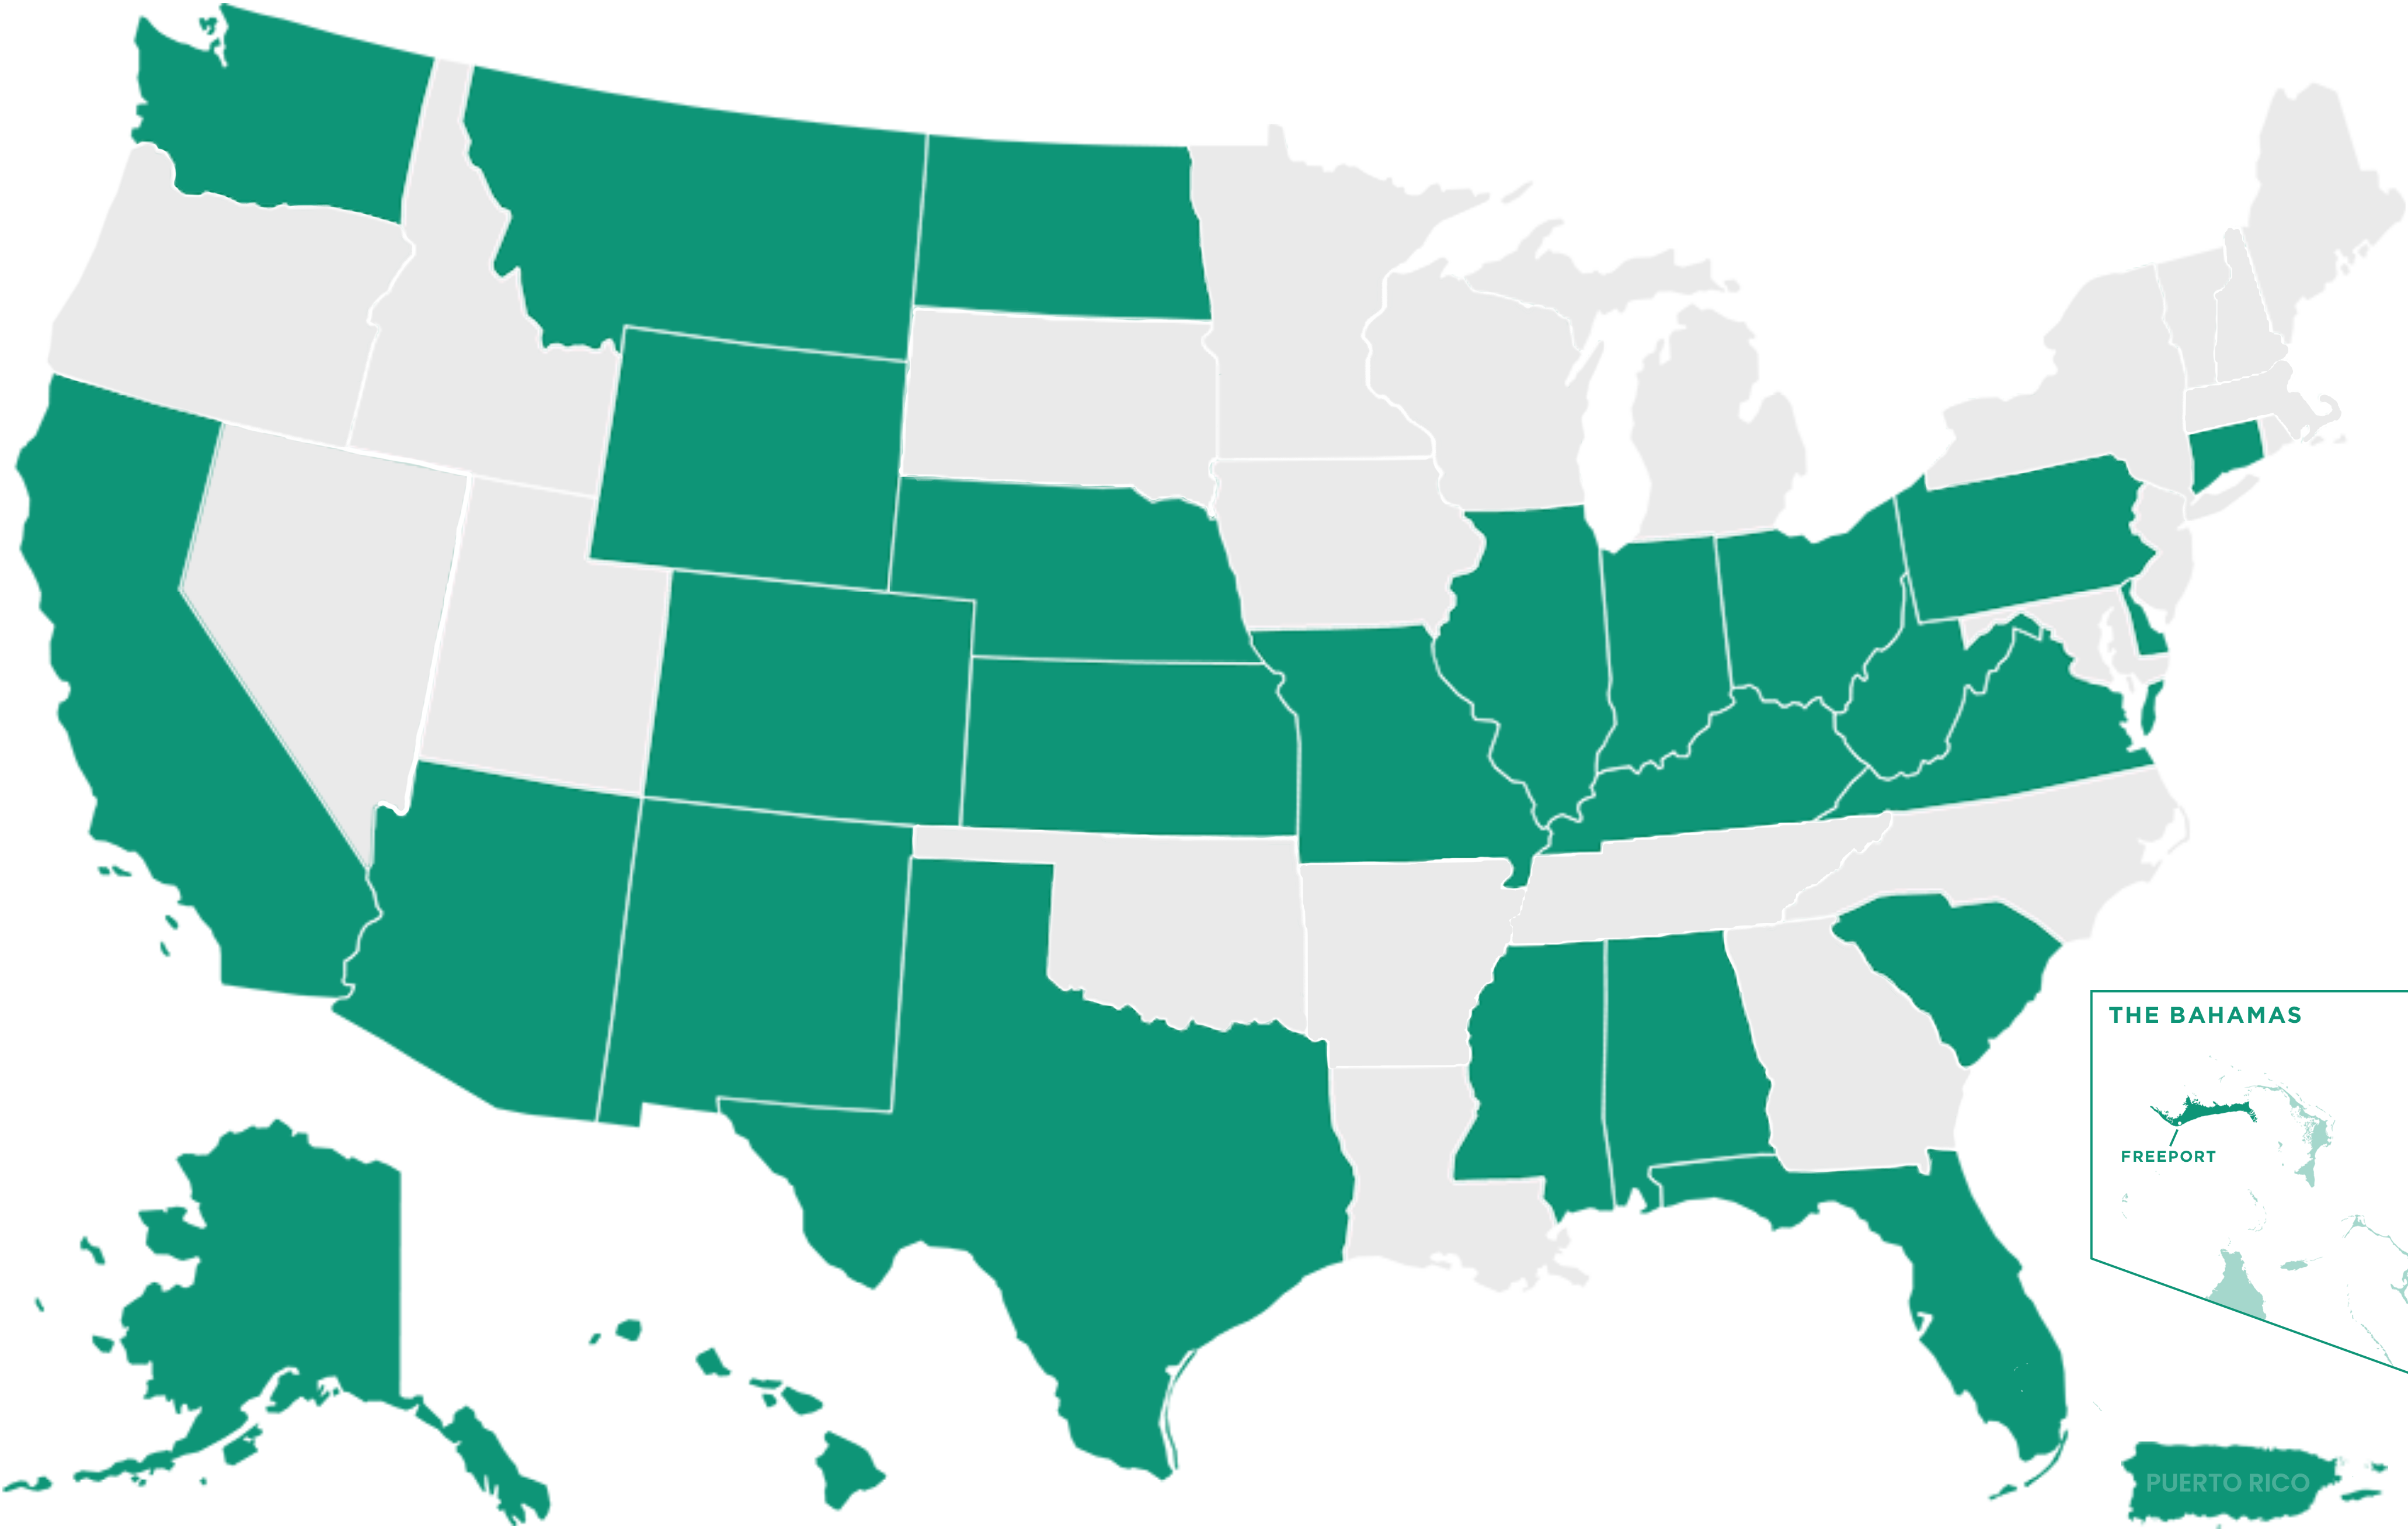 A map of the united states, highlighting the over 35 states which frey municipal software have software implemented.